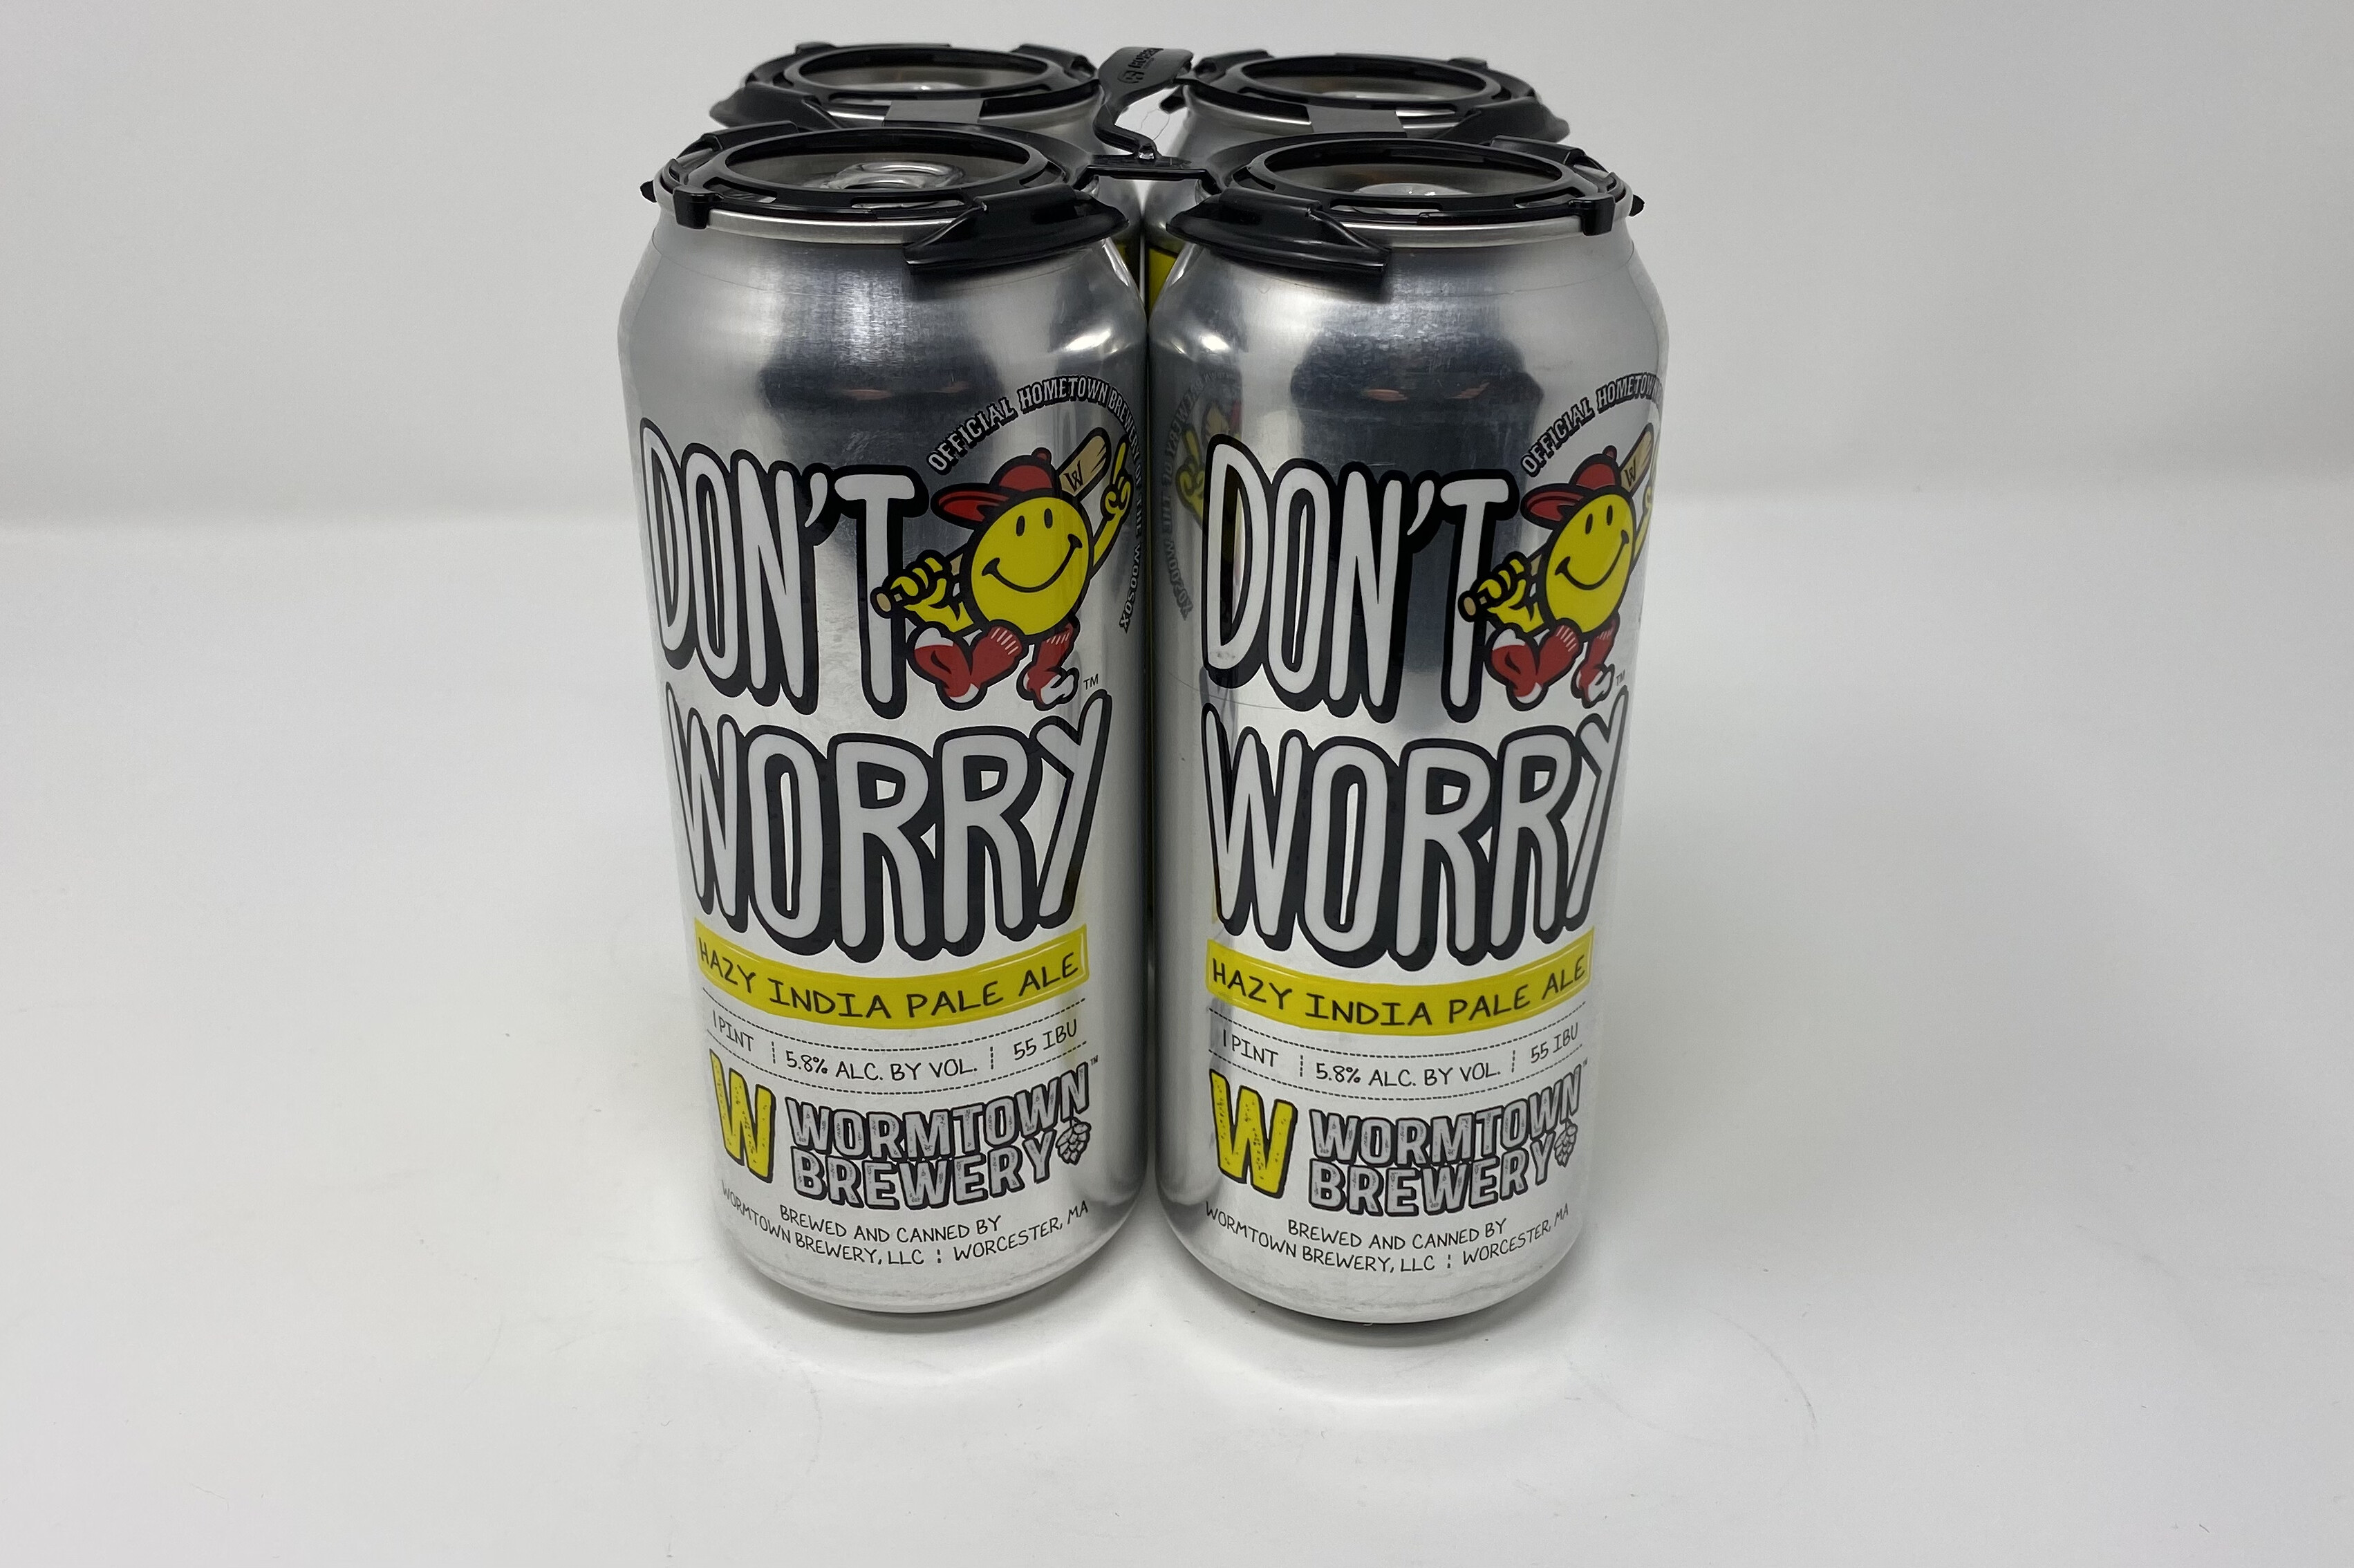 Wormtown Brewery, Don't Worry Hazy IPA